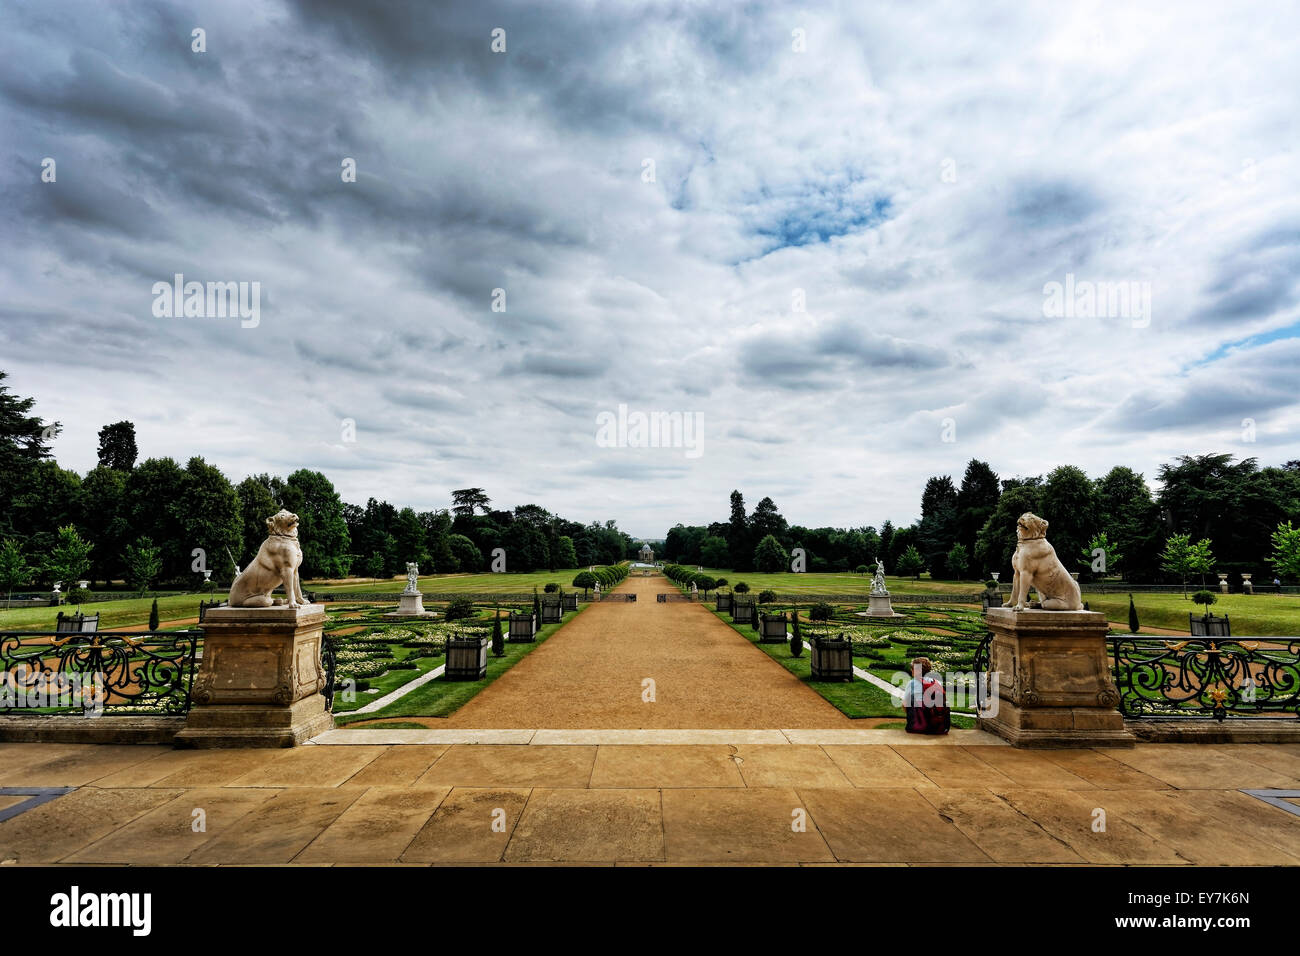 Wrest Park is a country estate located near Silsoe, Bedfordshire, England. It comprises Wrest Park, a Grade I listed house Stock Photo